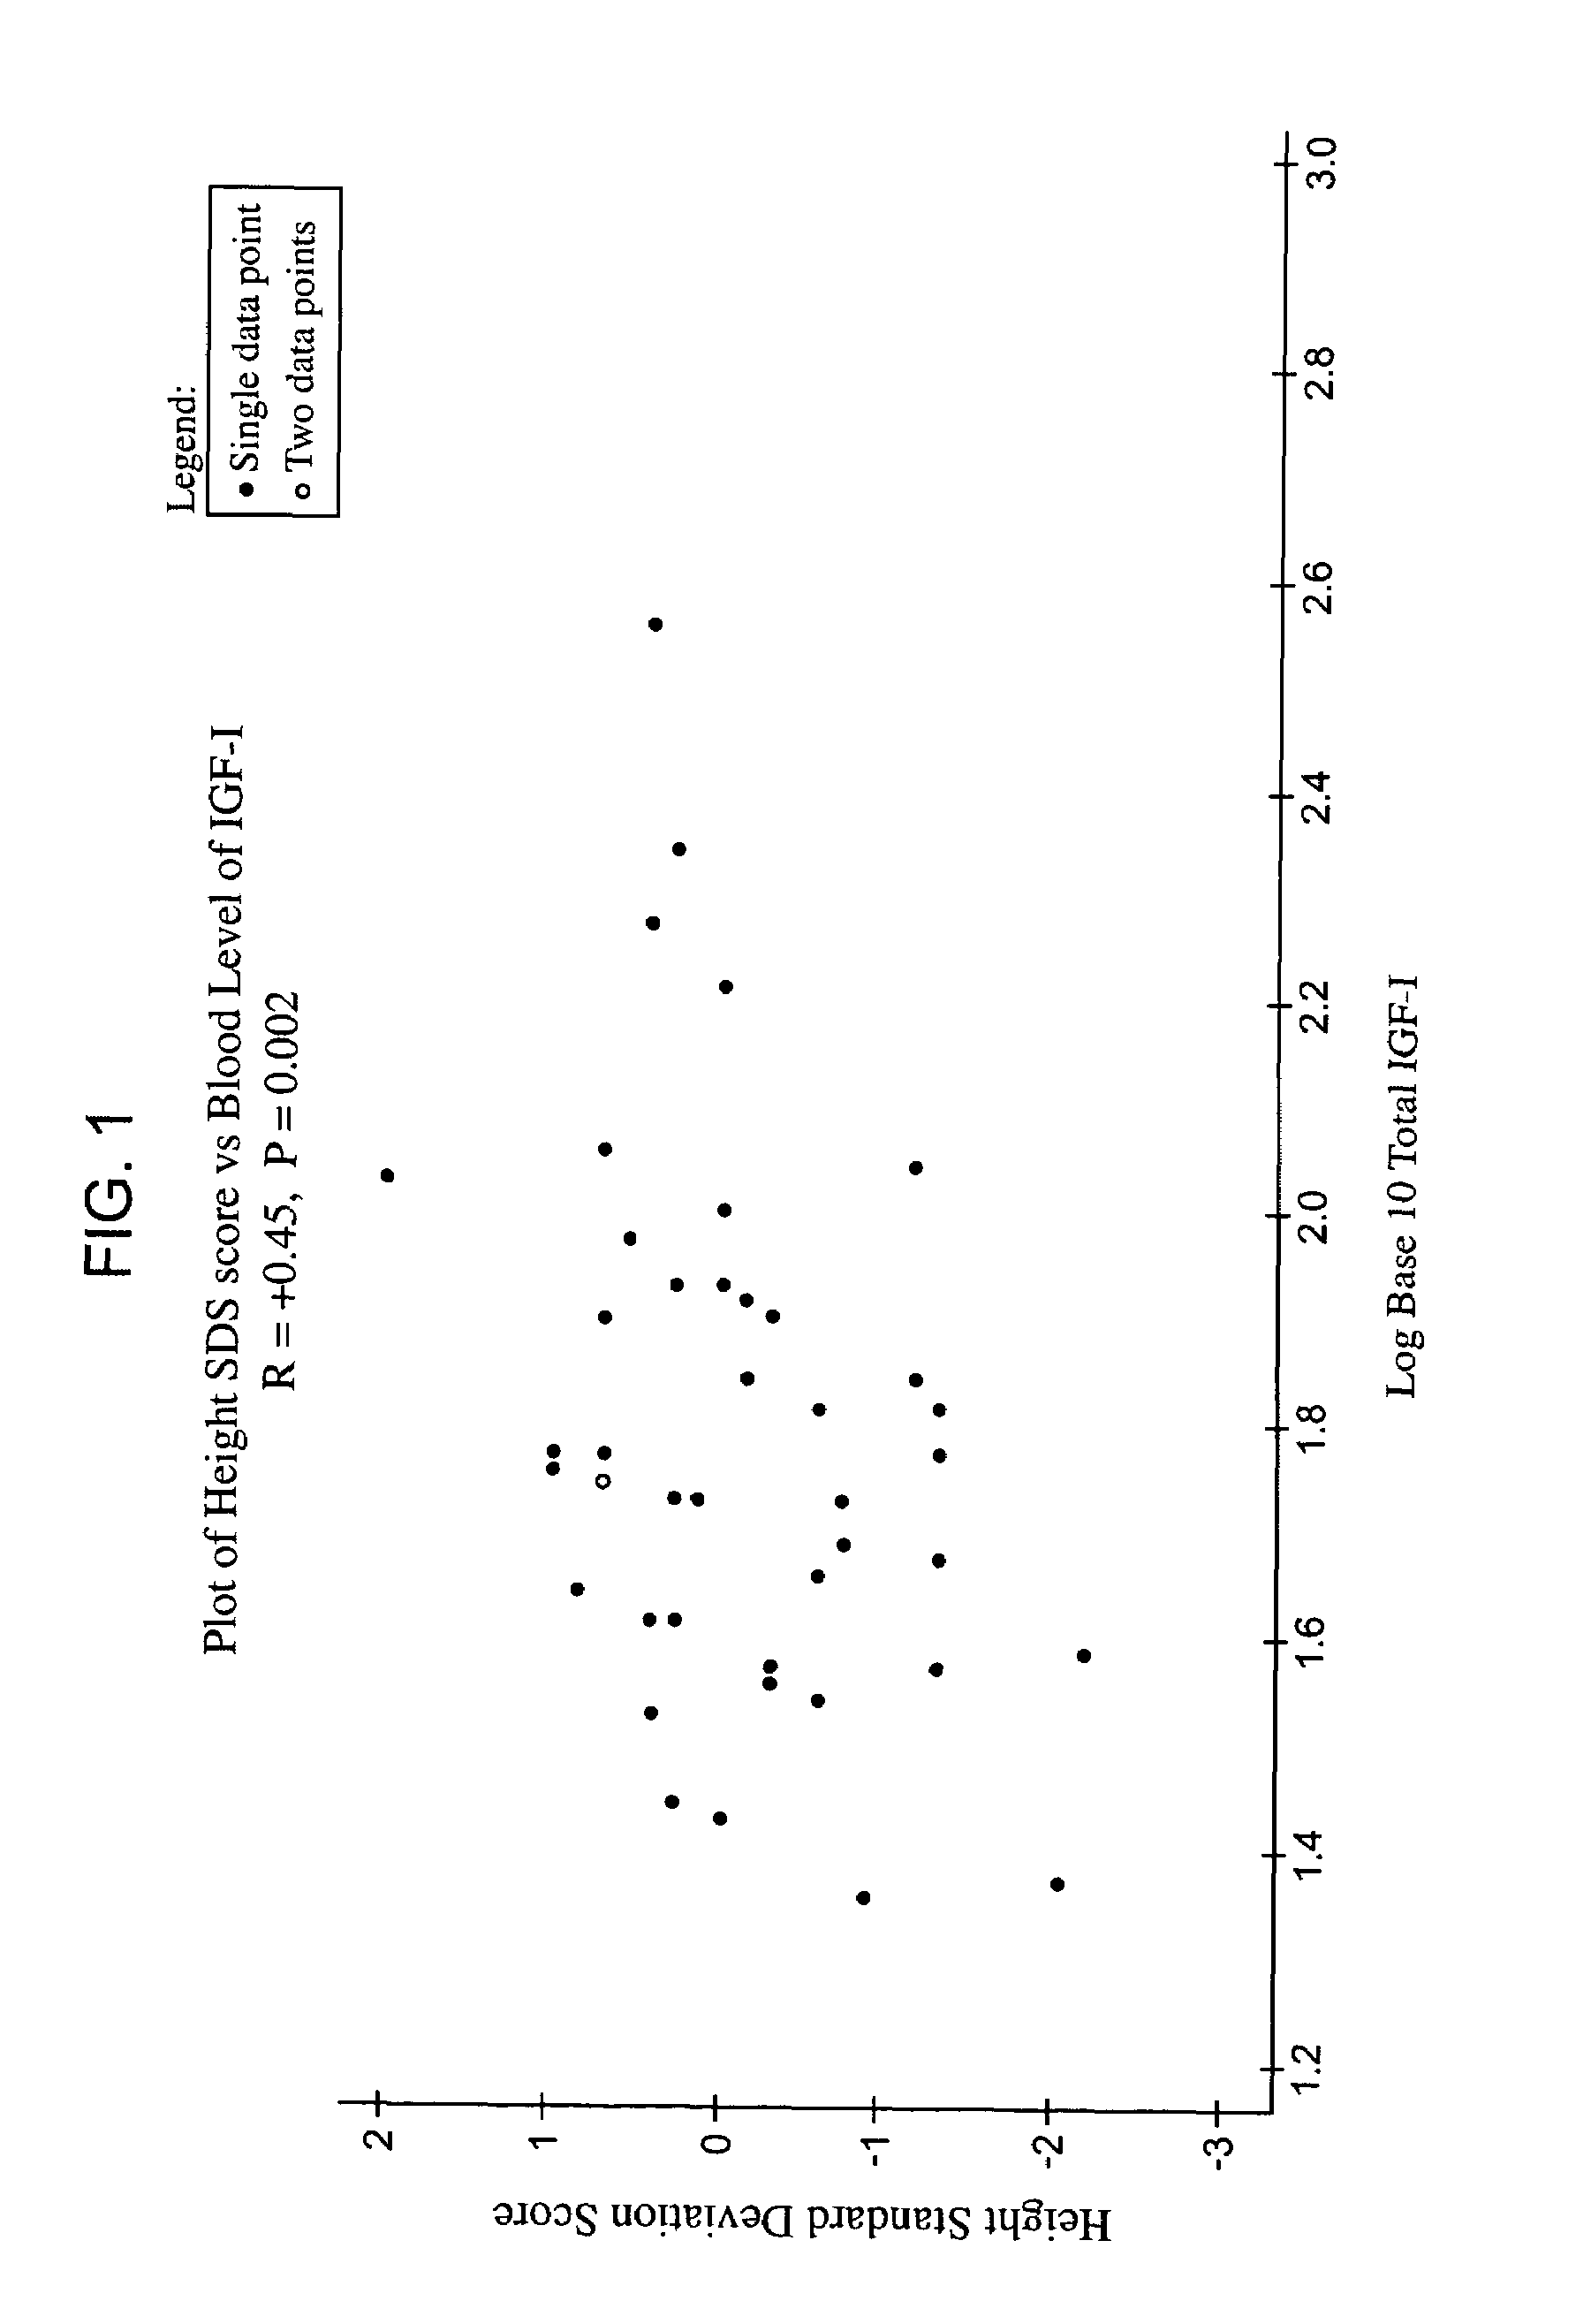 Methods for treatment of insulin-like growth factor-1 (IGF-1) deficiency